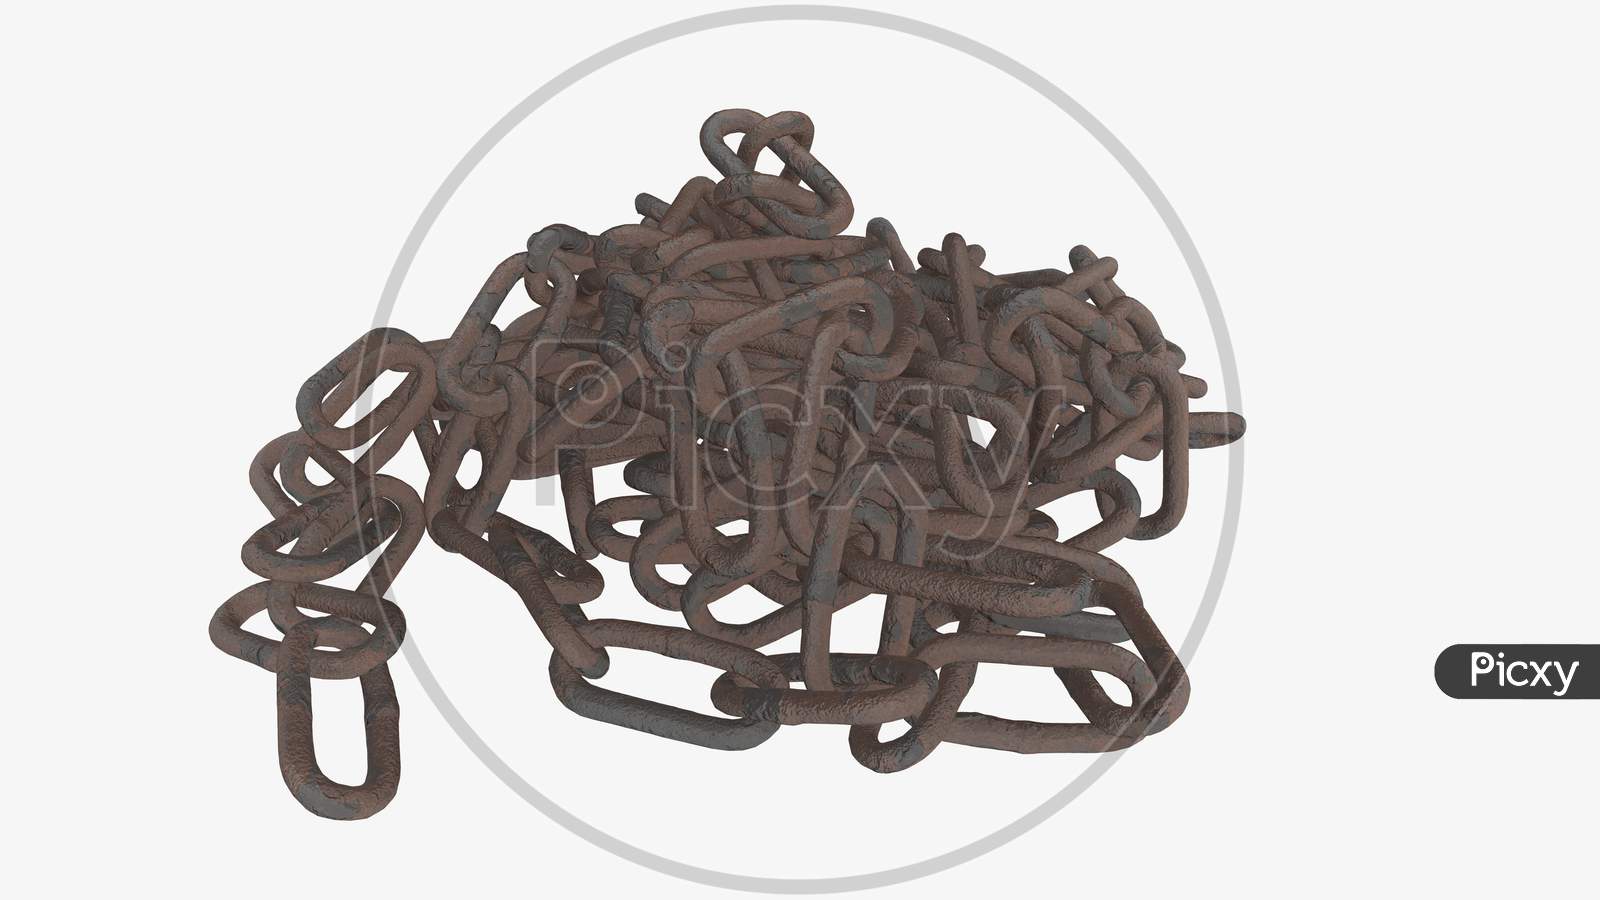 3D Render Rusty Chain Links Isolated On White Background